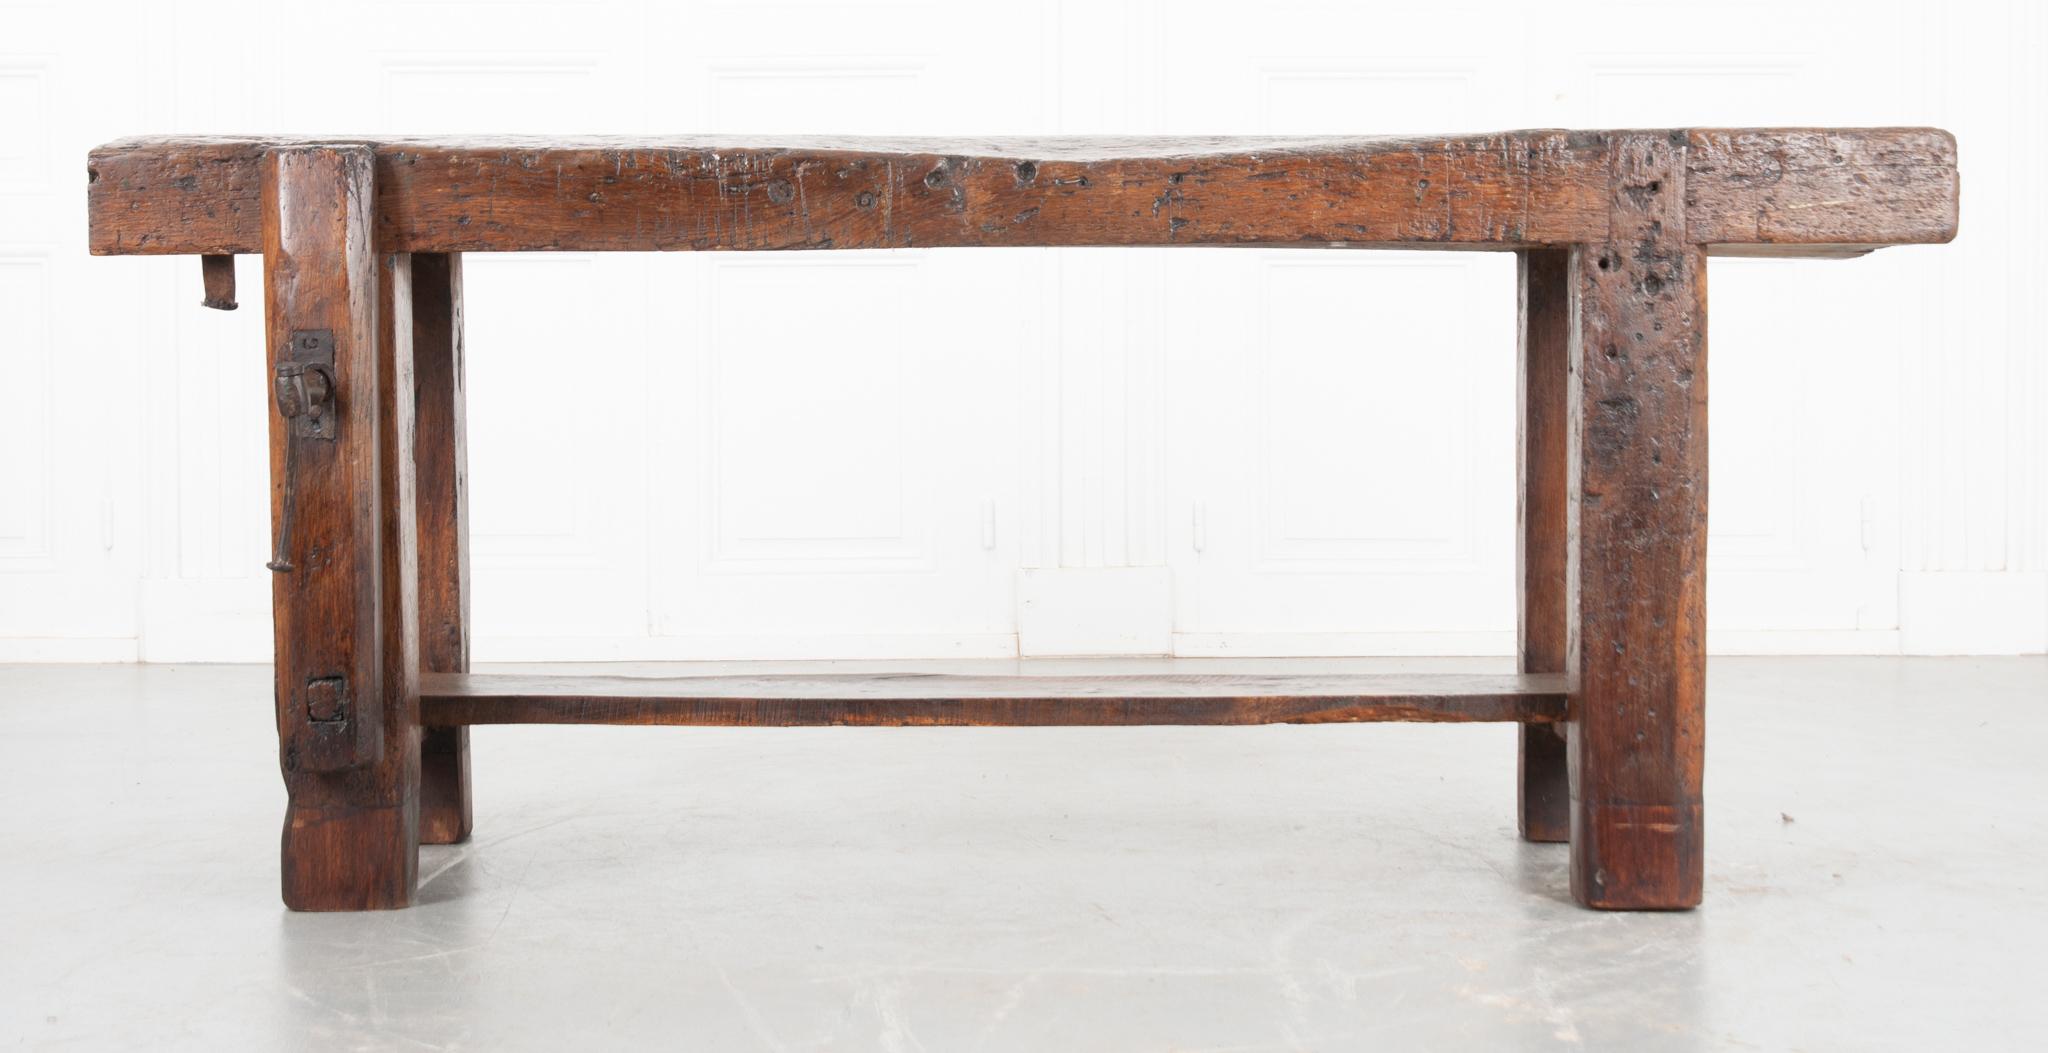 This French 19th century workbench is made of solid oak with a wonderful patina throughout. The top is made from a single board 4-½” thick! Two dowel holes in the top and a vise grip in working condition make this antique a functional workbench. A